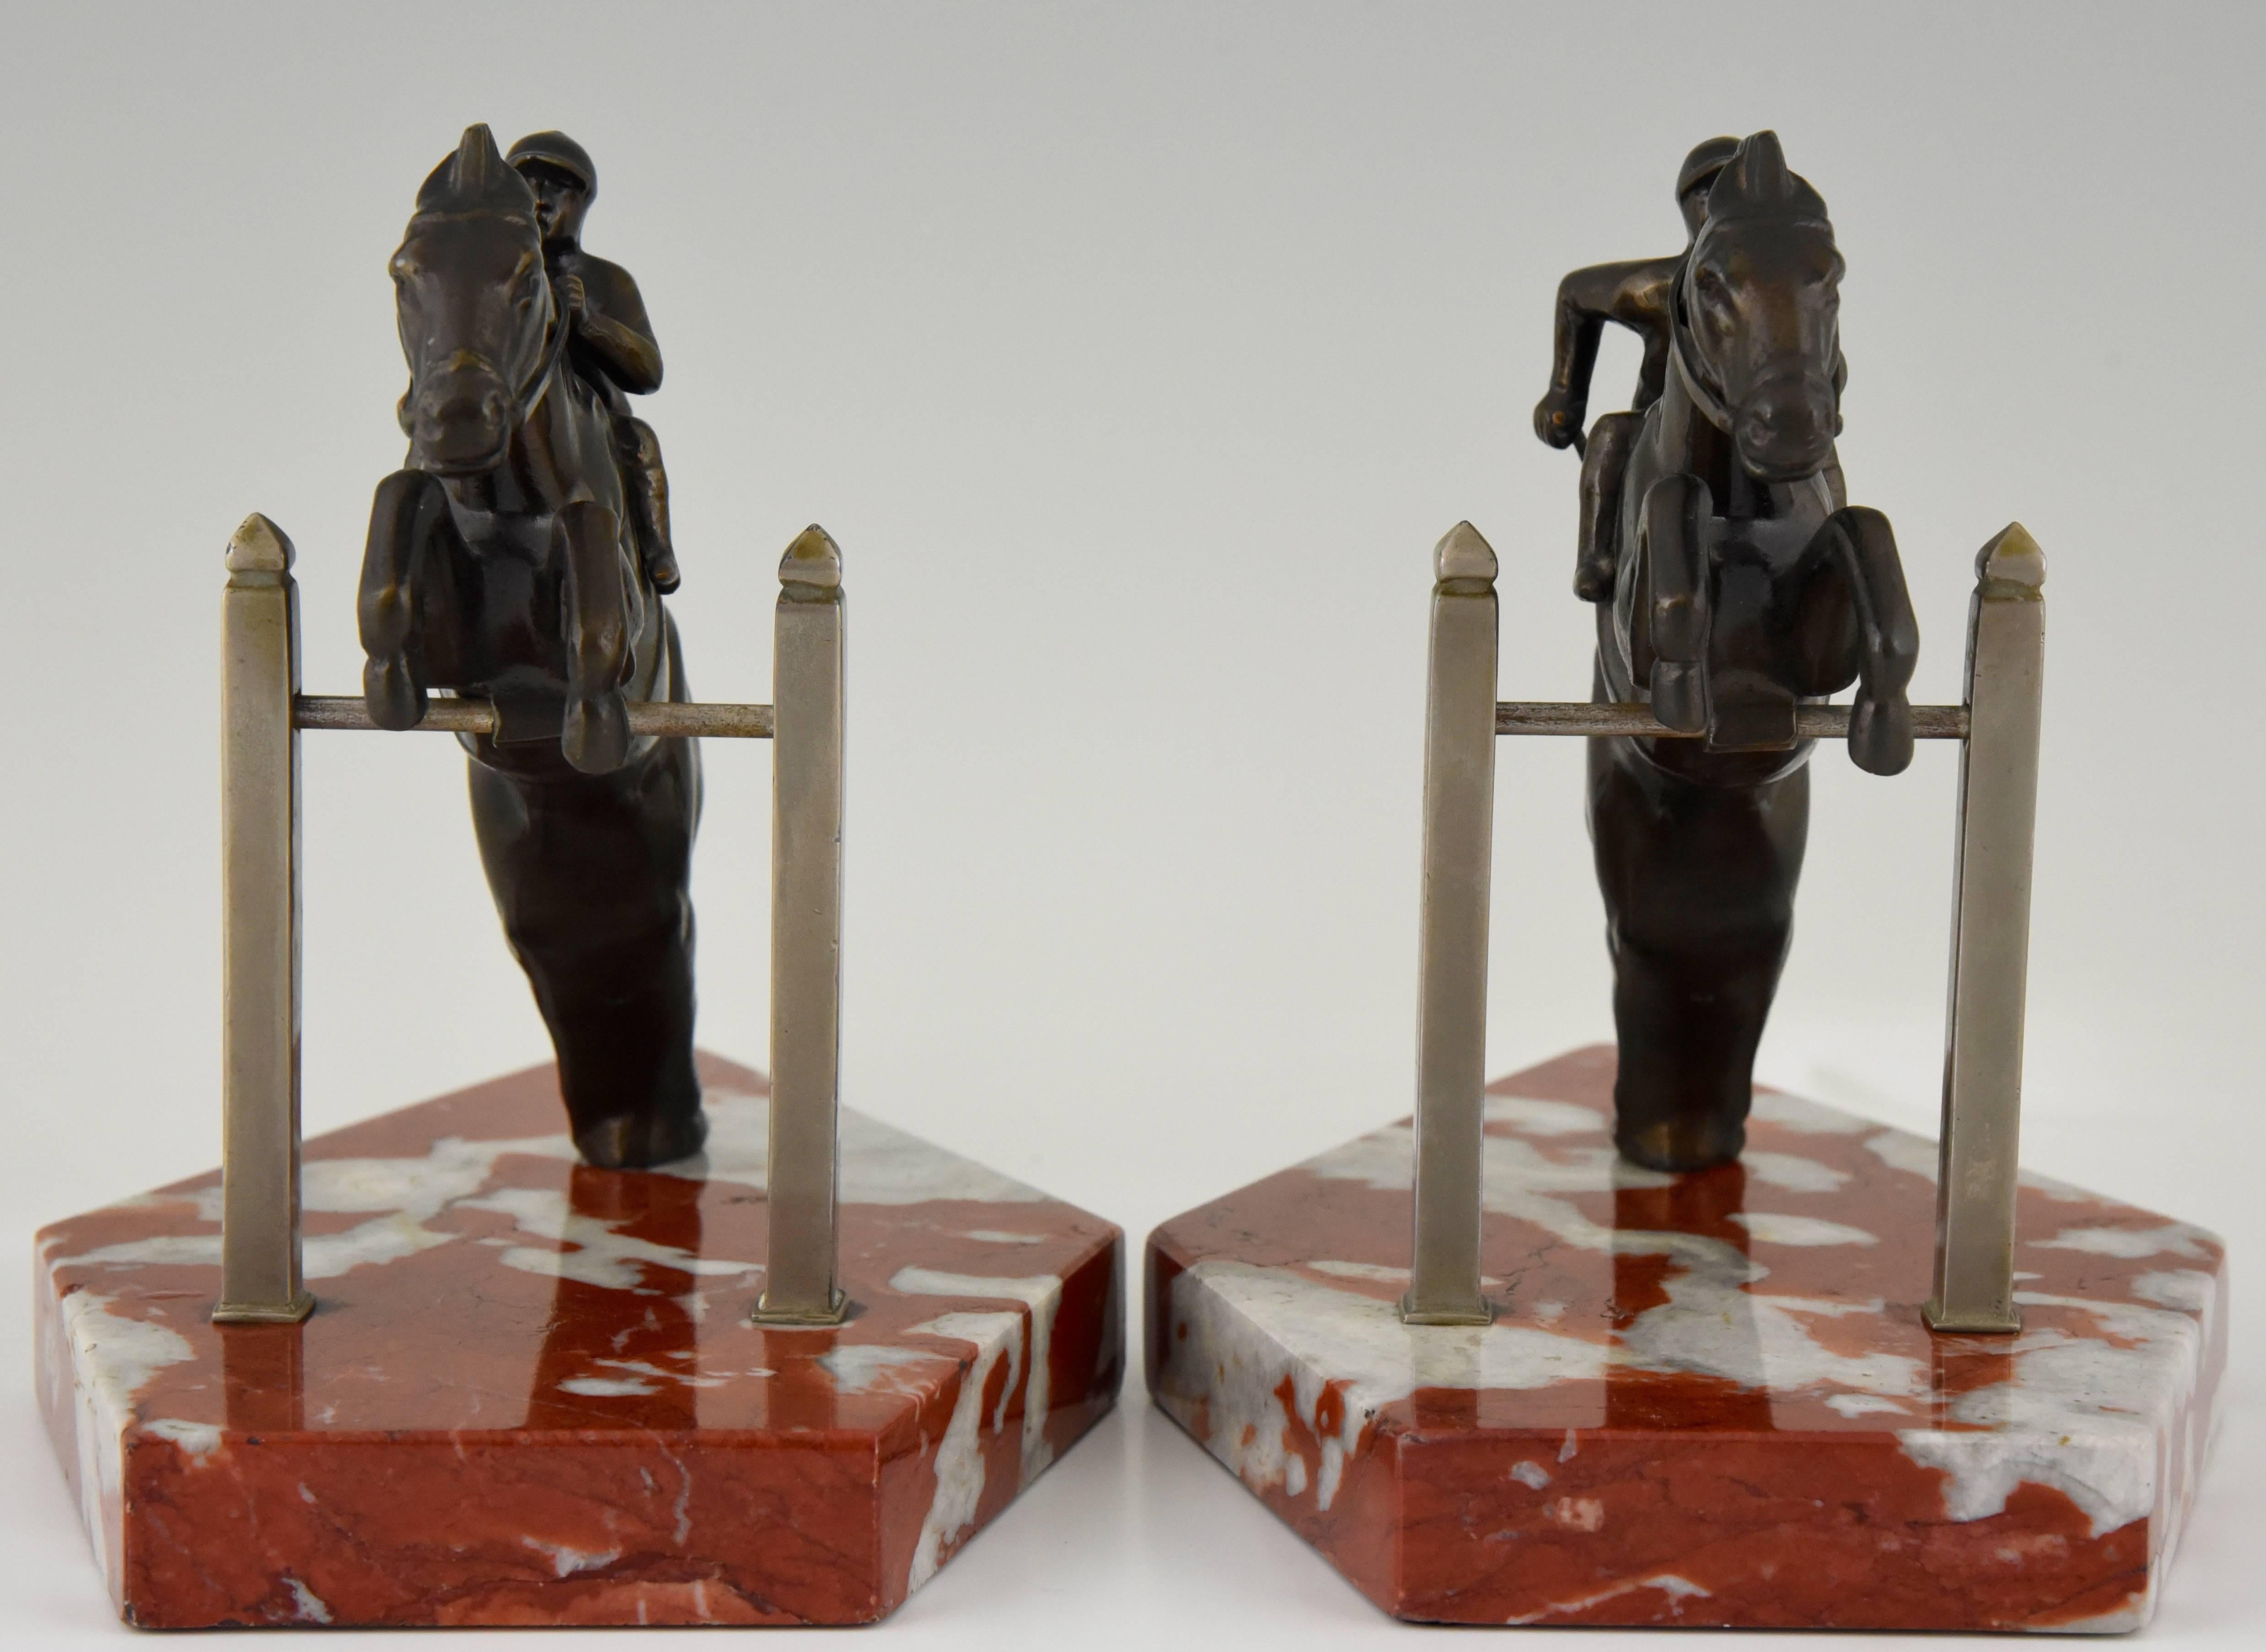 Art Deco bookends jockey on jumping horse, France, 1930.
Style: Art Deco
Date: 1930
Material: Patinated art metal on red marble base.
Origin: France
Size: H 16.5 cm x L 20.5 cm x W 13.3 cm
H 6.5 inch x L 8 inch x W 5.2 inch.
Condition: Very